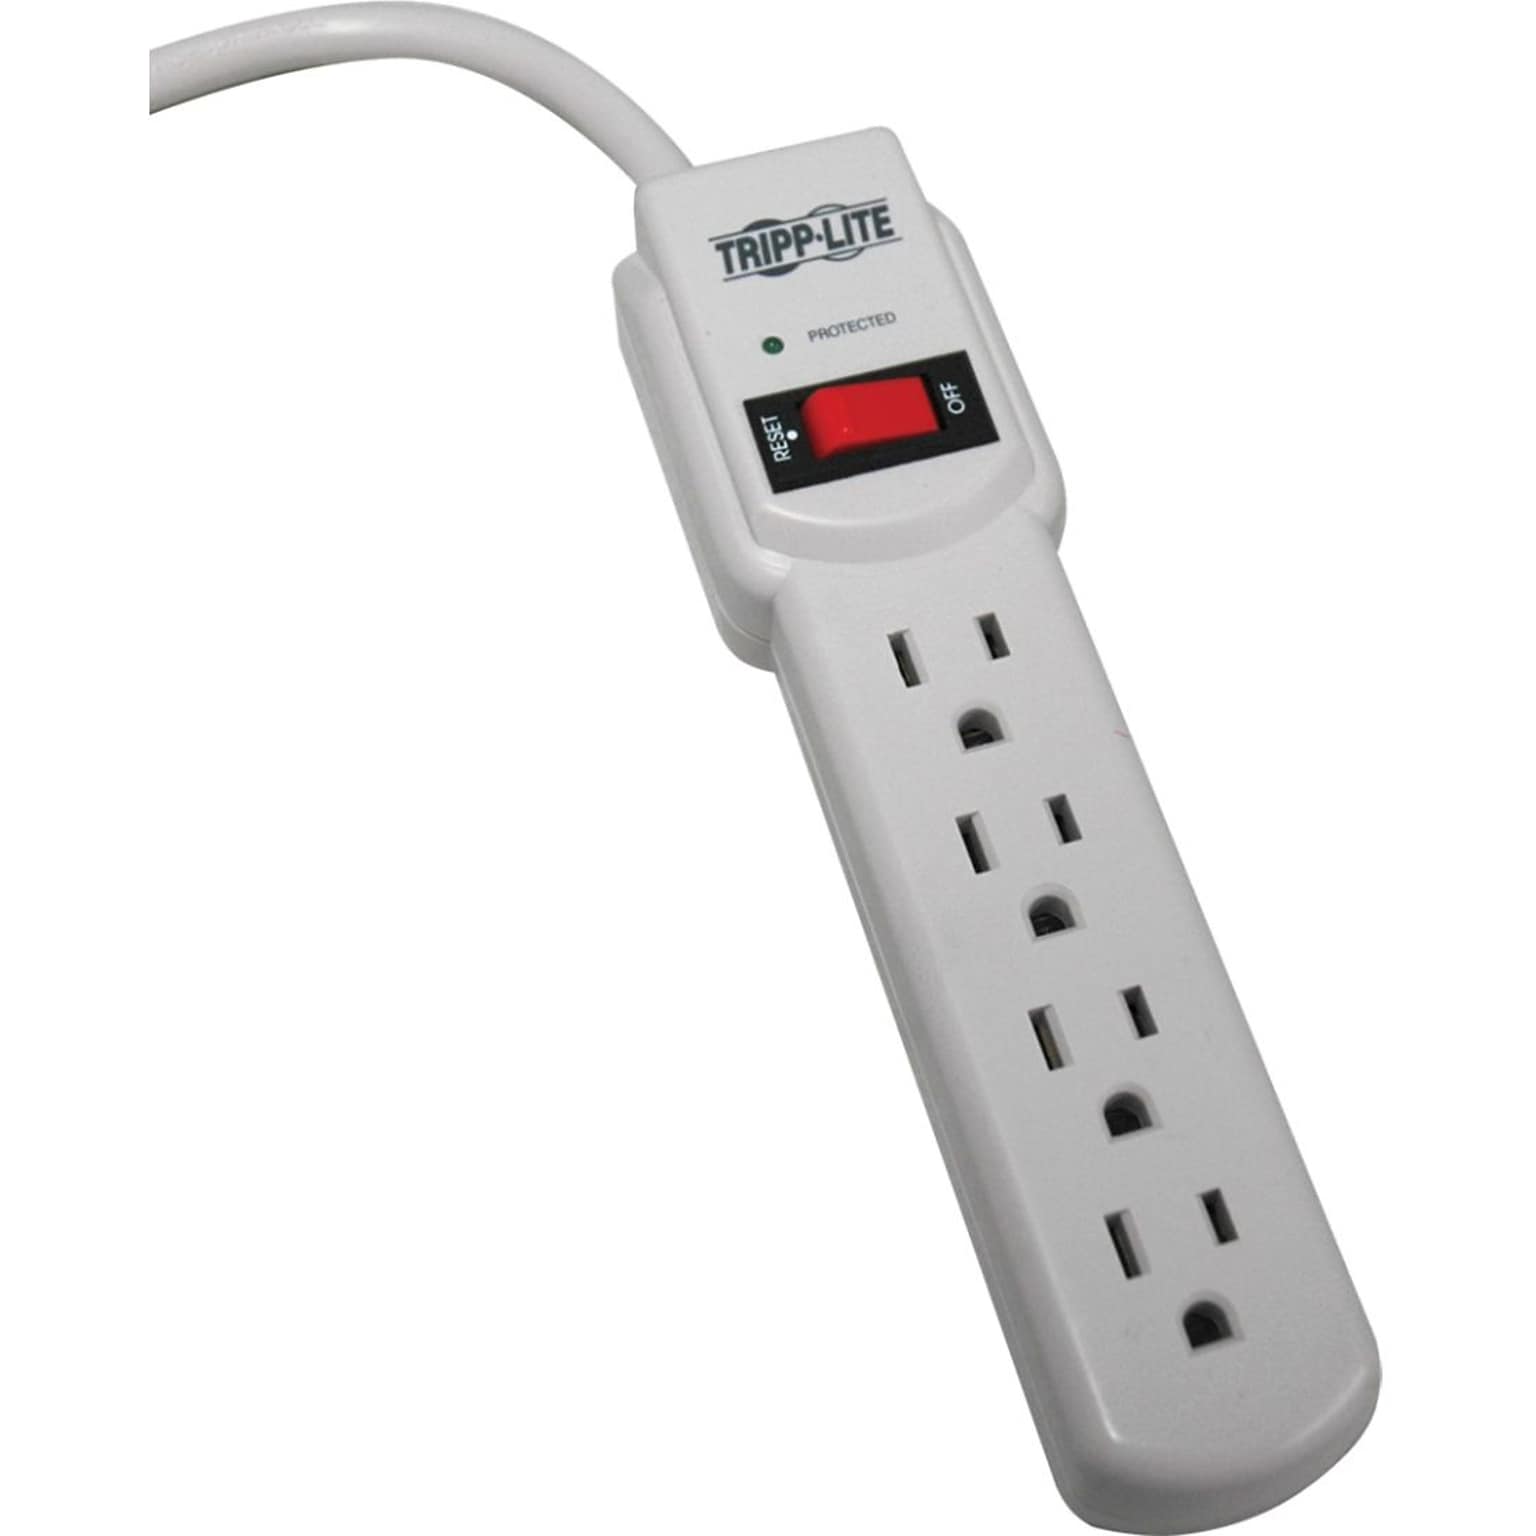 Tripp Lite Protect it!® 4-Outlet 450 Joule Surge Suppressor With 4 Cord